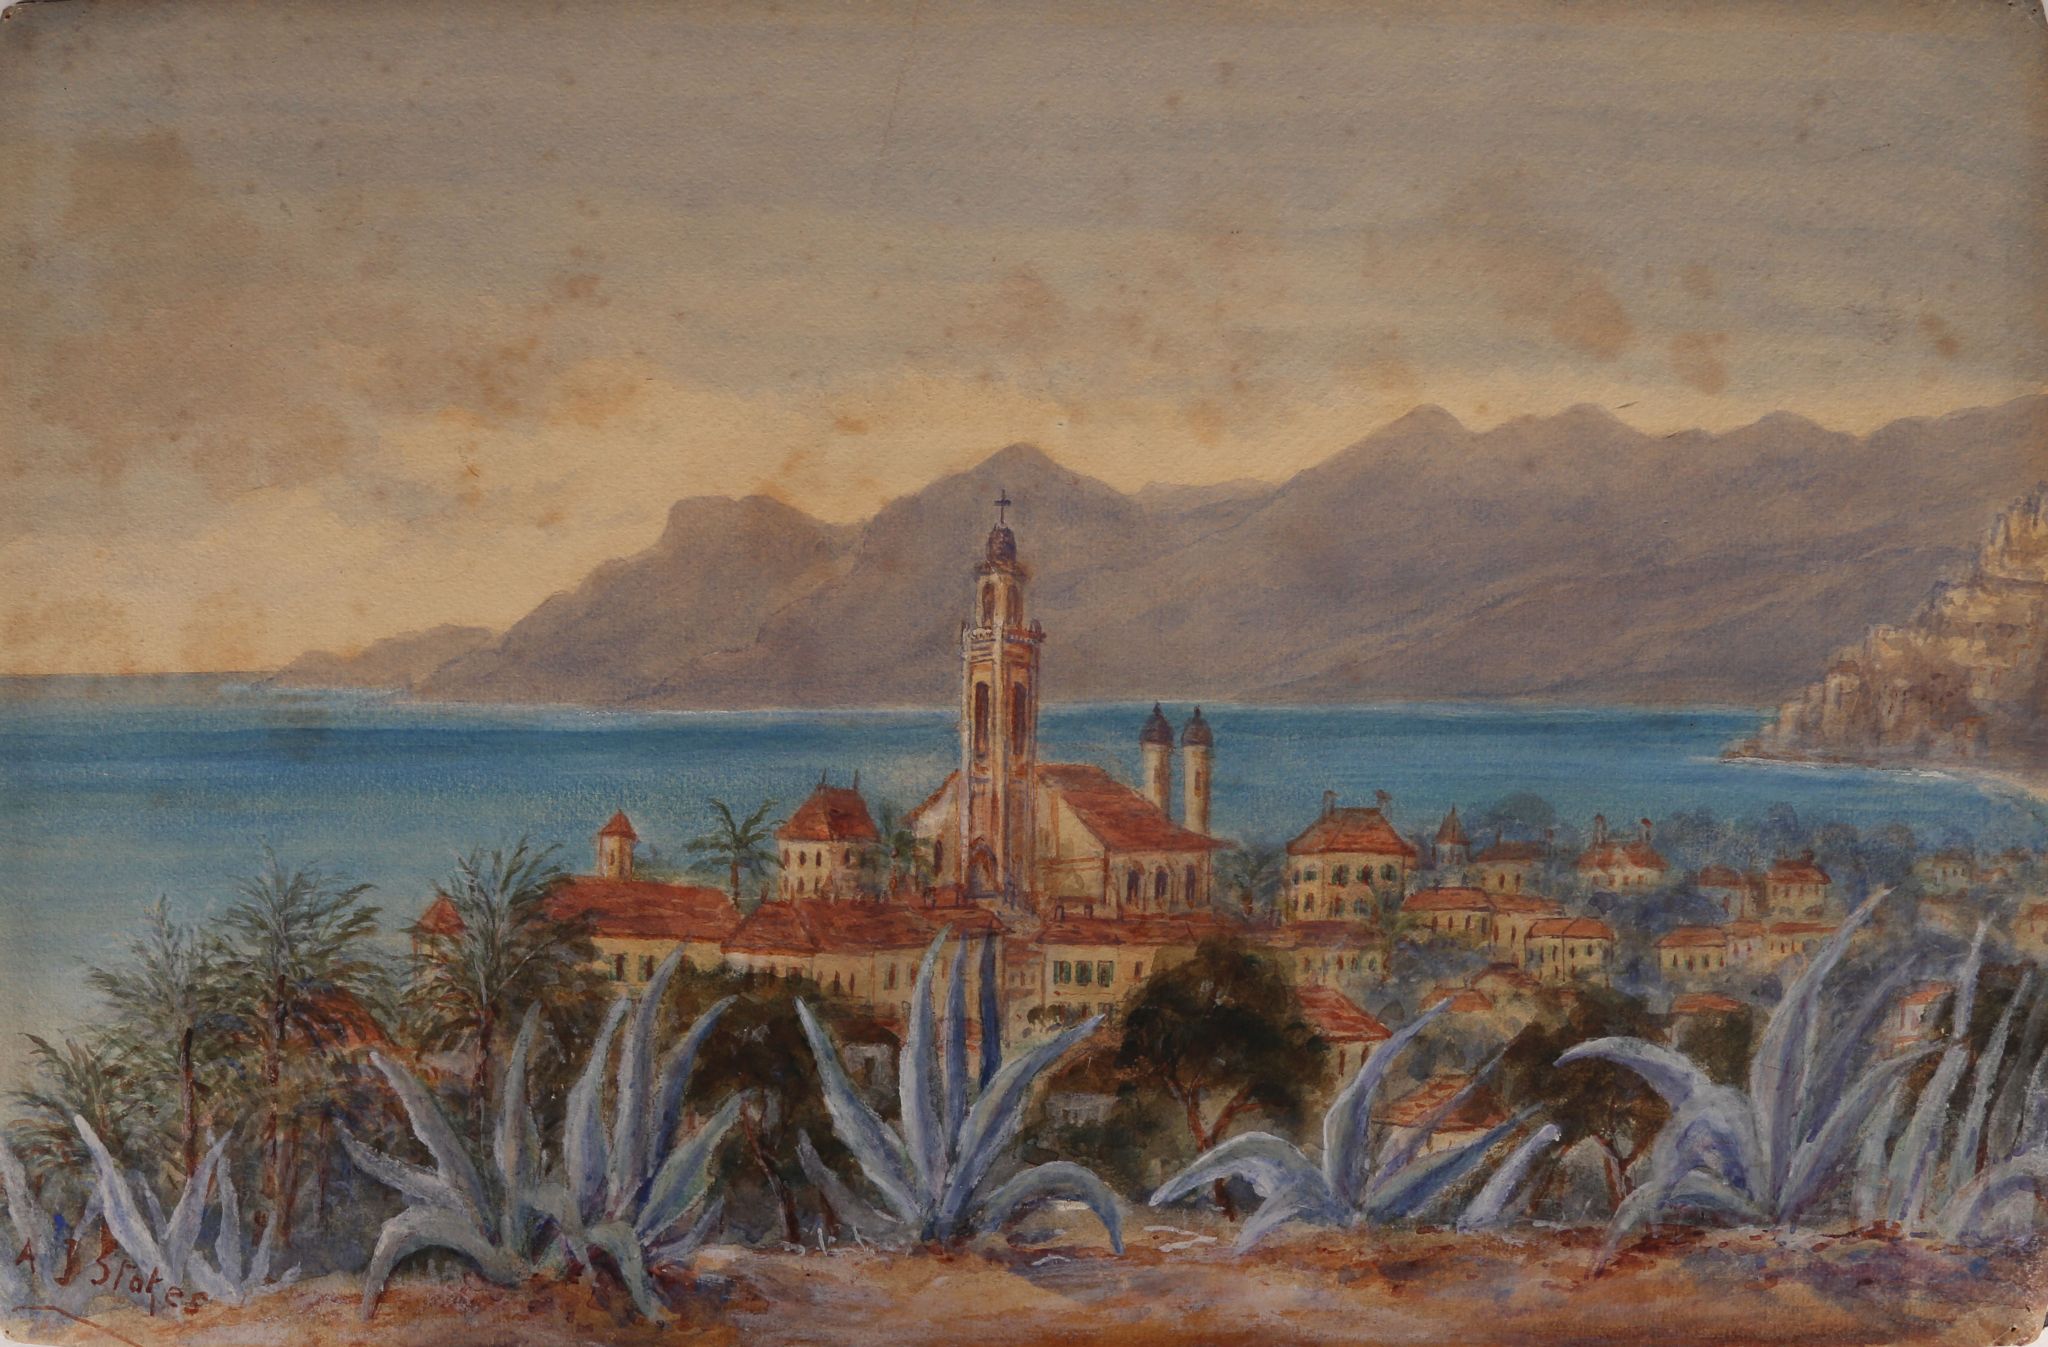 A selection of early 20th Century watercolour studies of the Italian Coast, including views of the - Image 9 of 9